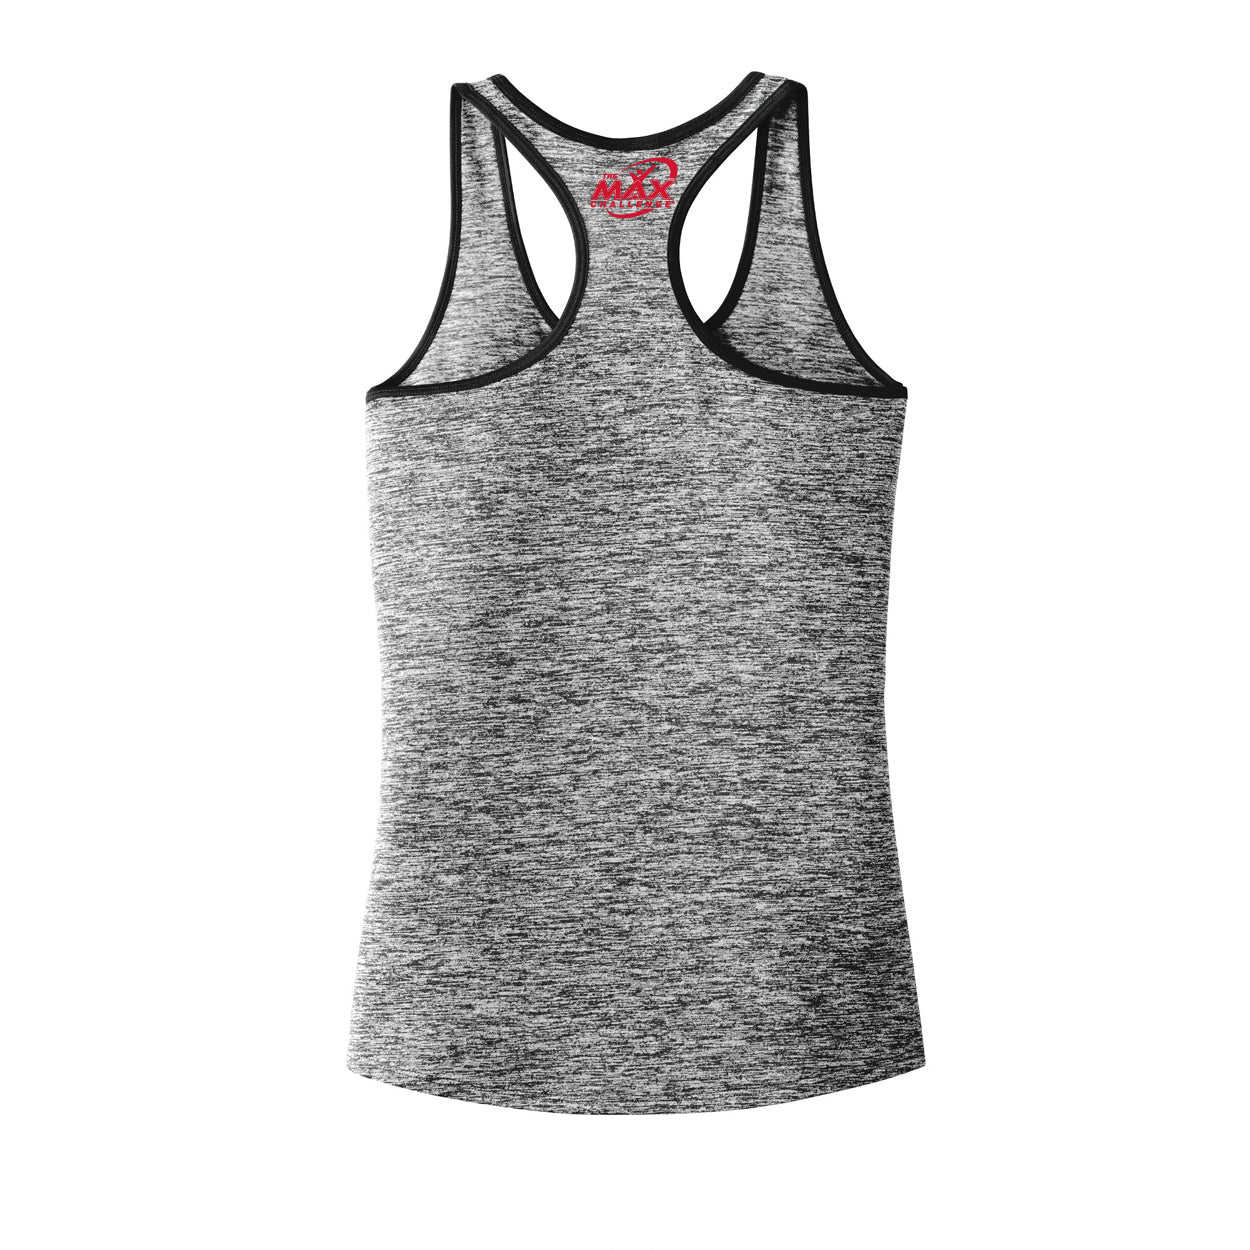 Women's "Get Fit Done" Tank